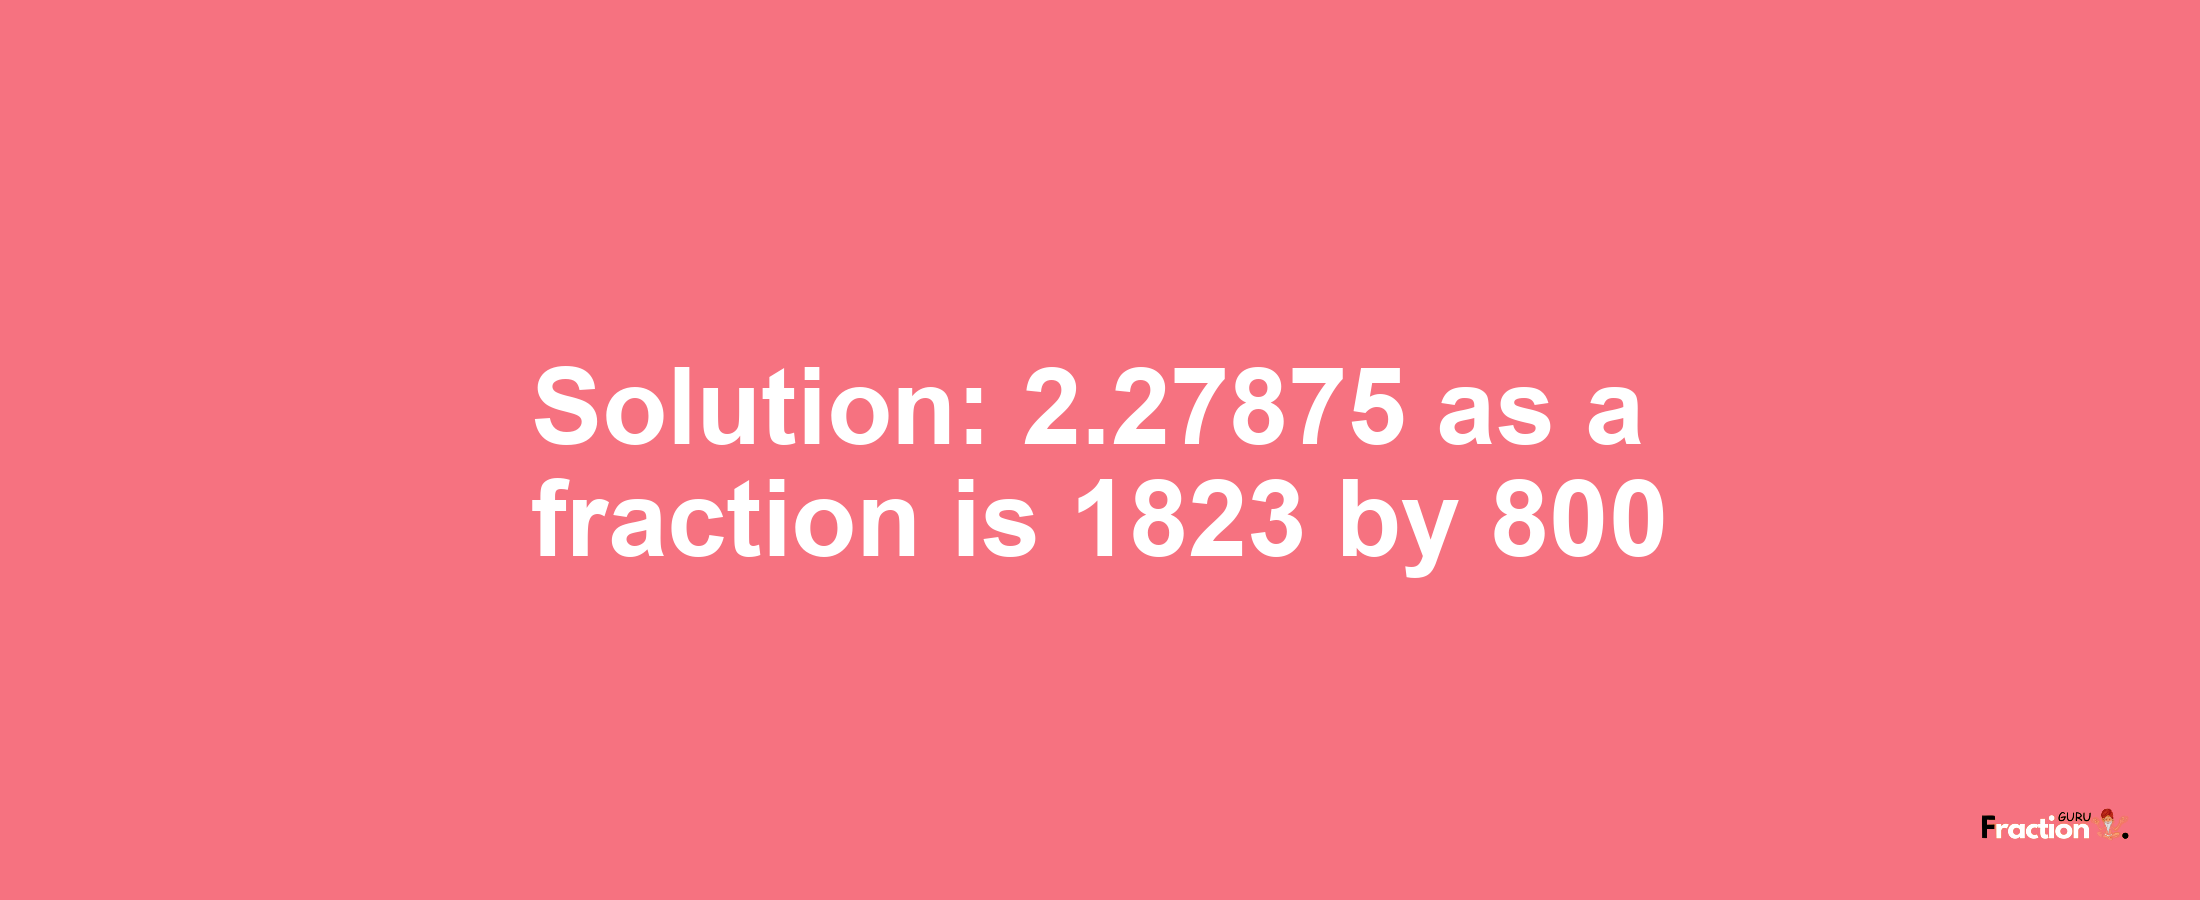 Solution:2.27875 as a fraction is 1823/800